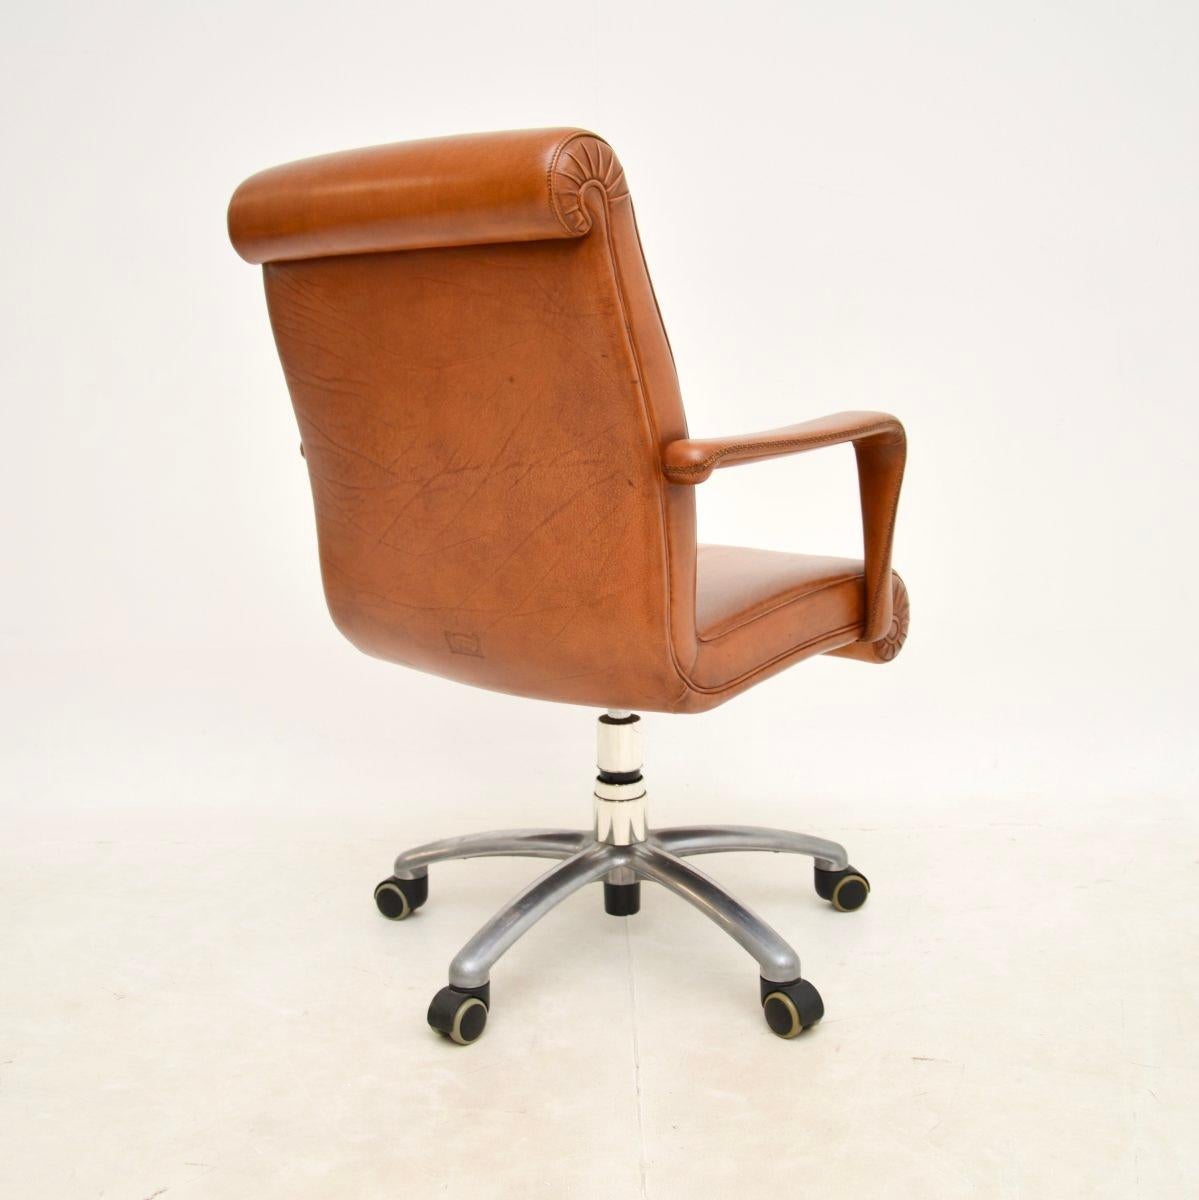 Contemporary Vintage Italian Leather Swivel Desk Chair by Poltrona Frau For Sale